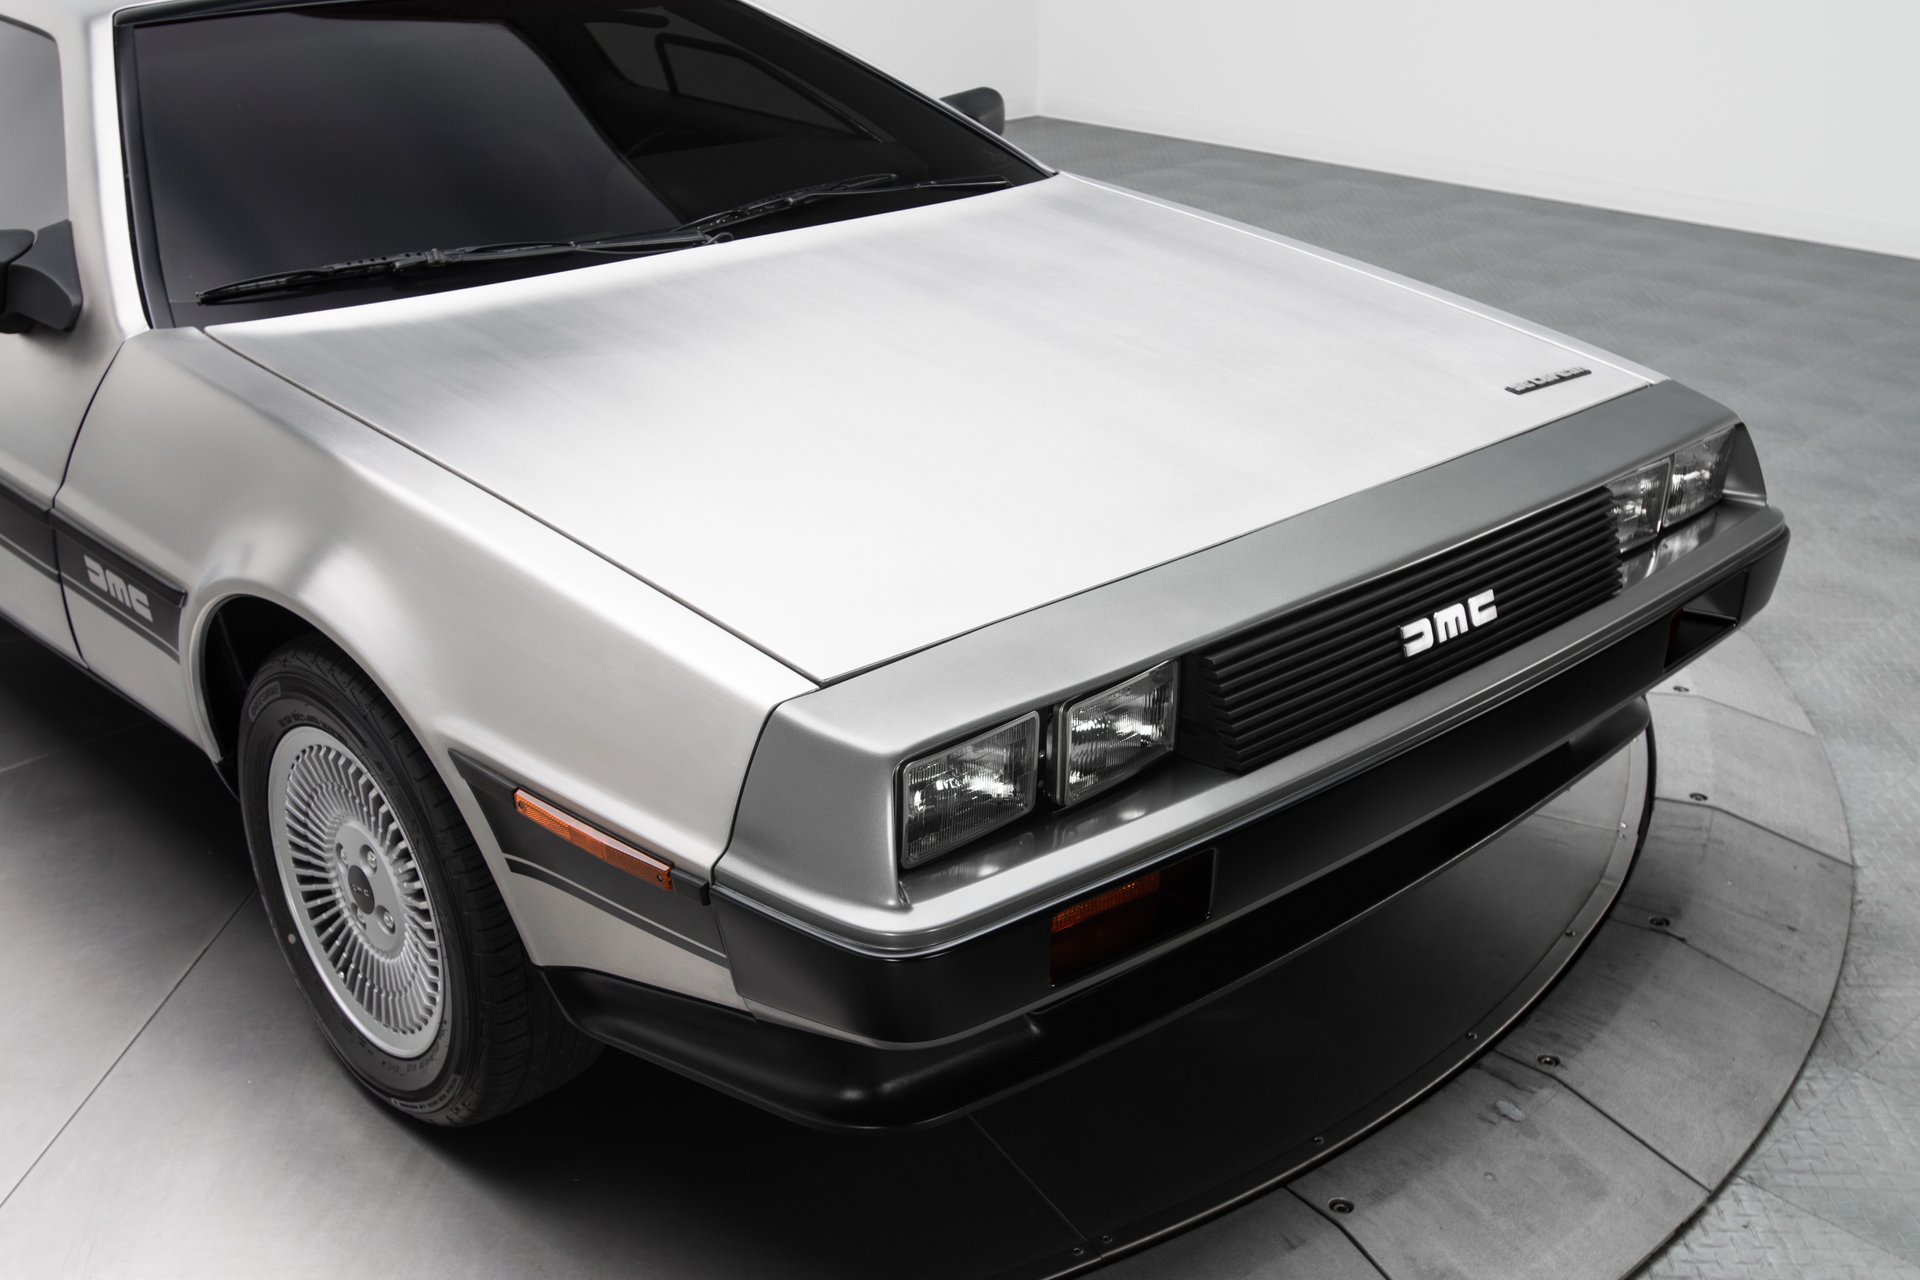 134659 1982 DeLorean DMC-12 RK Motors Classic Cars and Muscle Cars for Sale